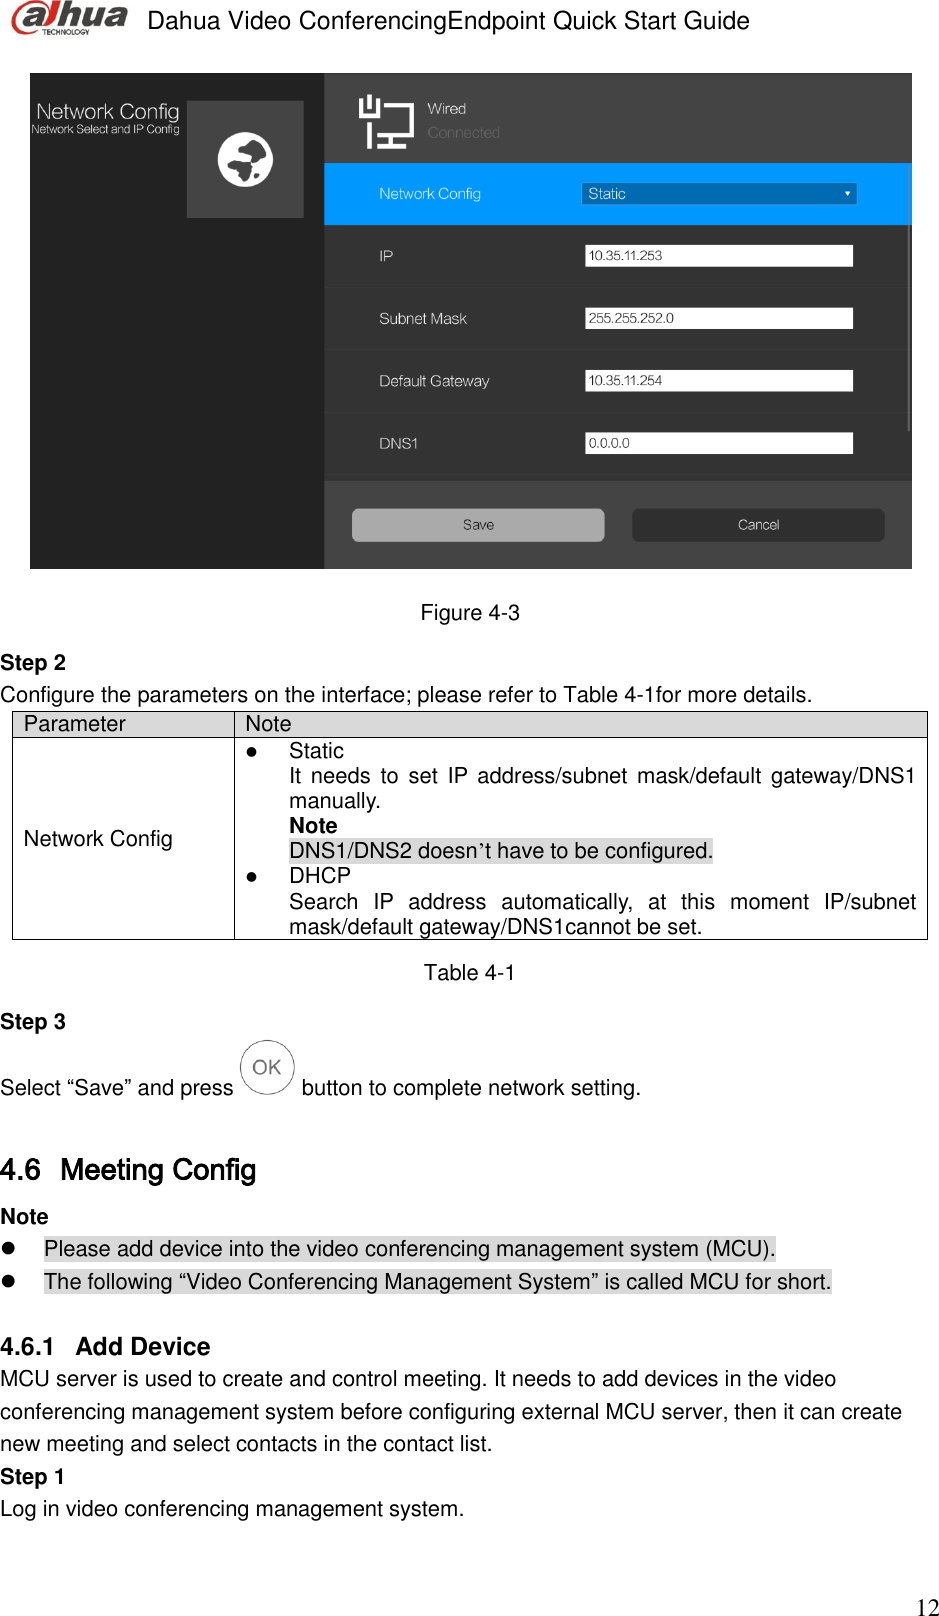 Page 21 of Zhejiang Dahua Vision Technology VCS-TS20A0 VIDEO CONFERENCING ENDPOINT User Manual